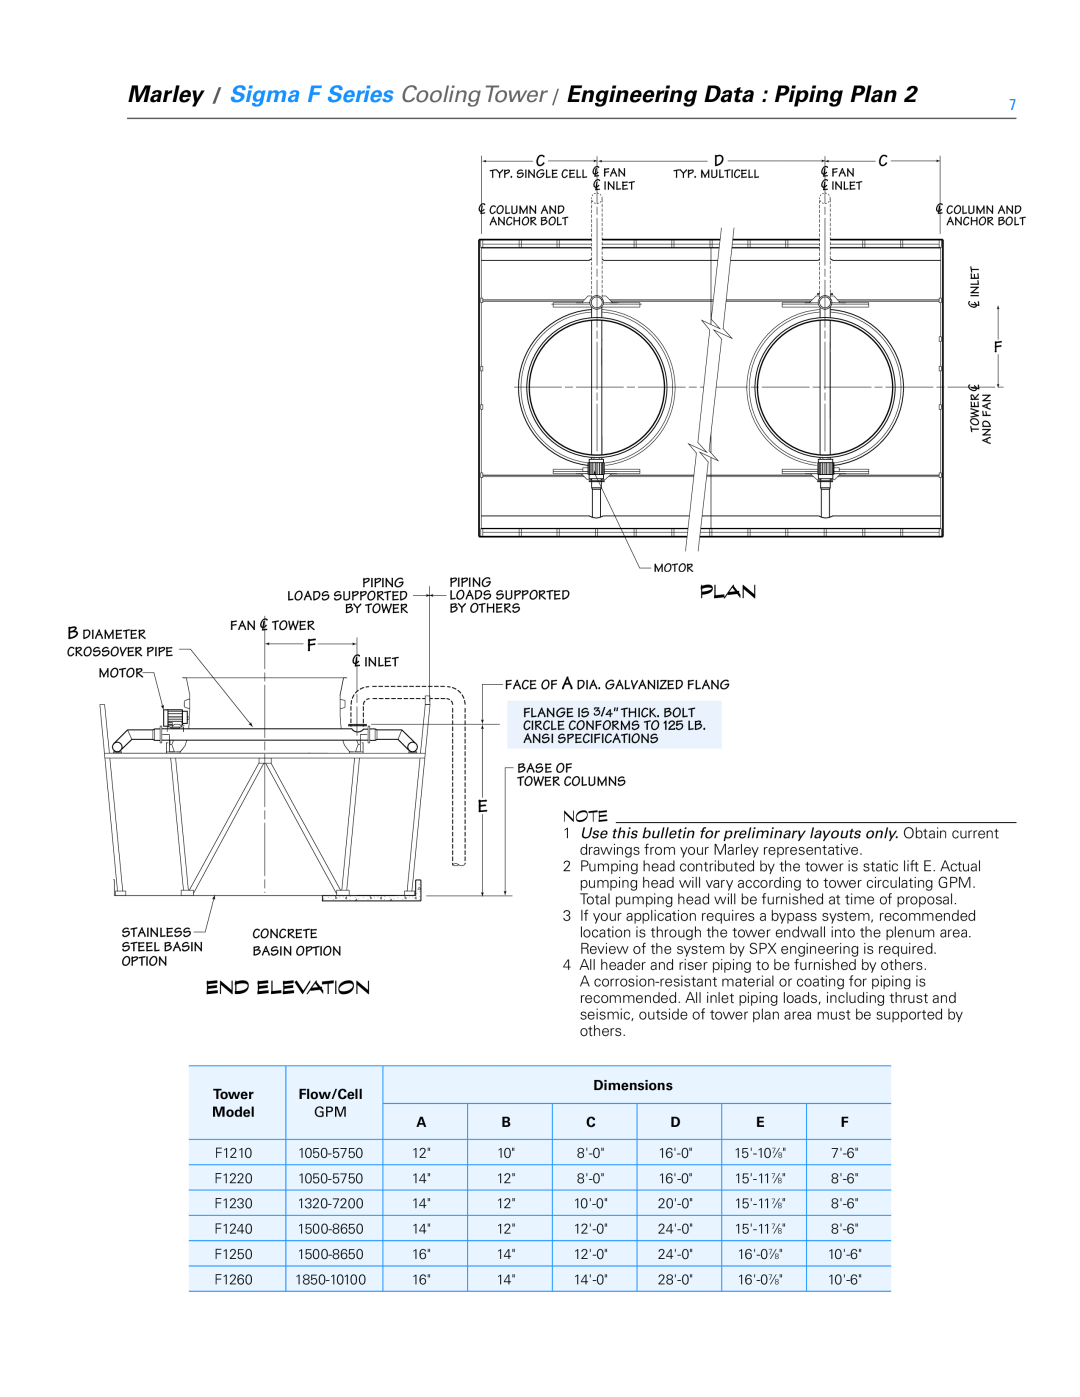 SPX Cooling Technologies FSIG-TS-08A Engineering Data Piping Plan, EnD elevation, Marley / Sigma F Series CoolingTower 